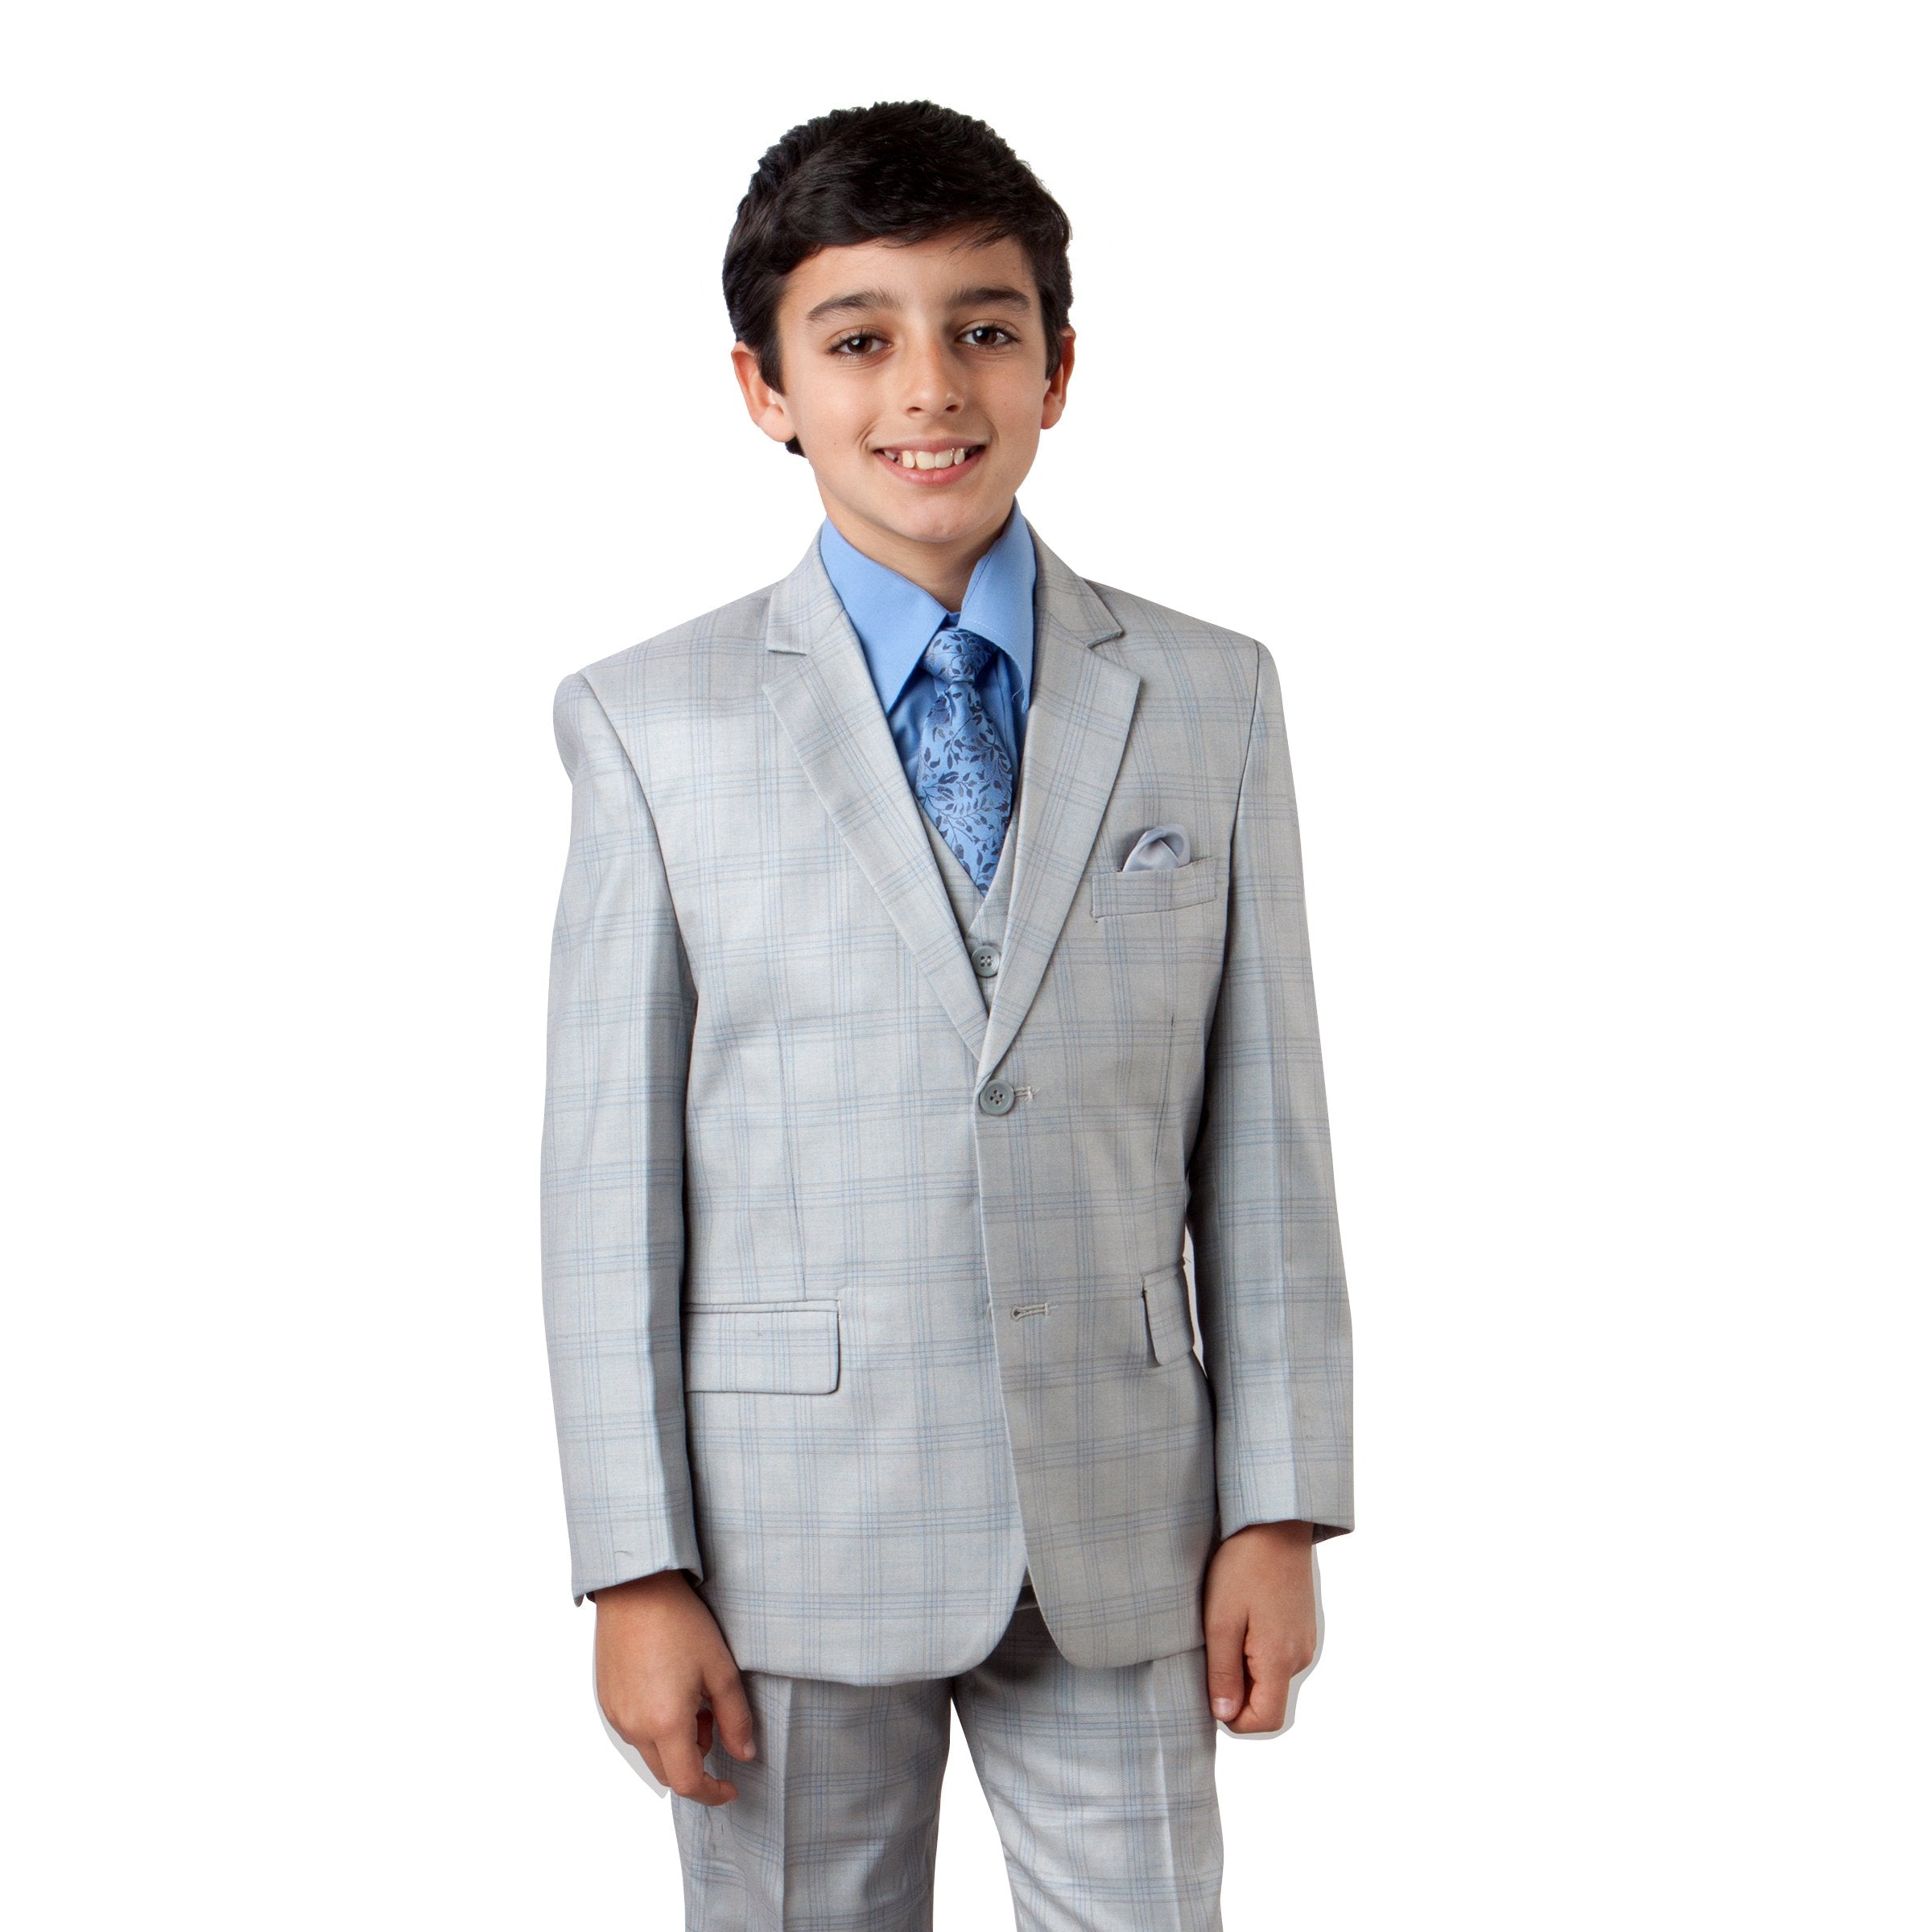 3-Piece Boys Checkered Suit Set With Free Matching Shirt & Tie Suits For Boy's